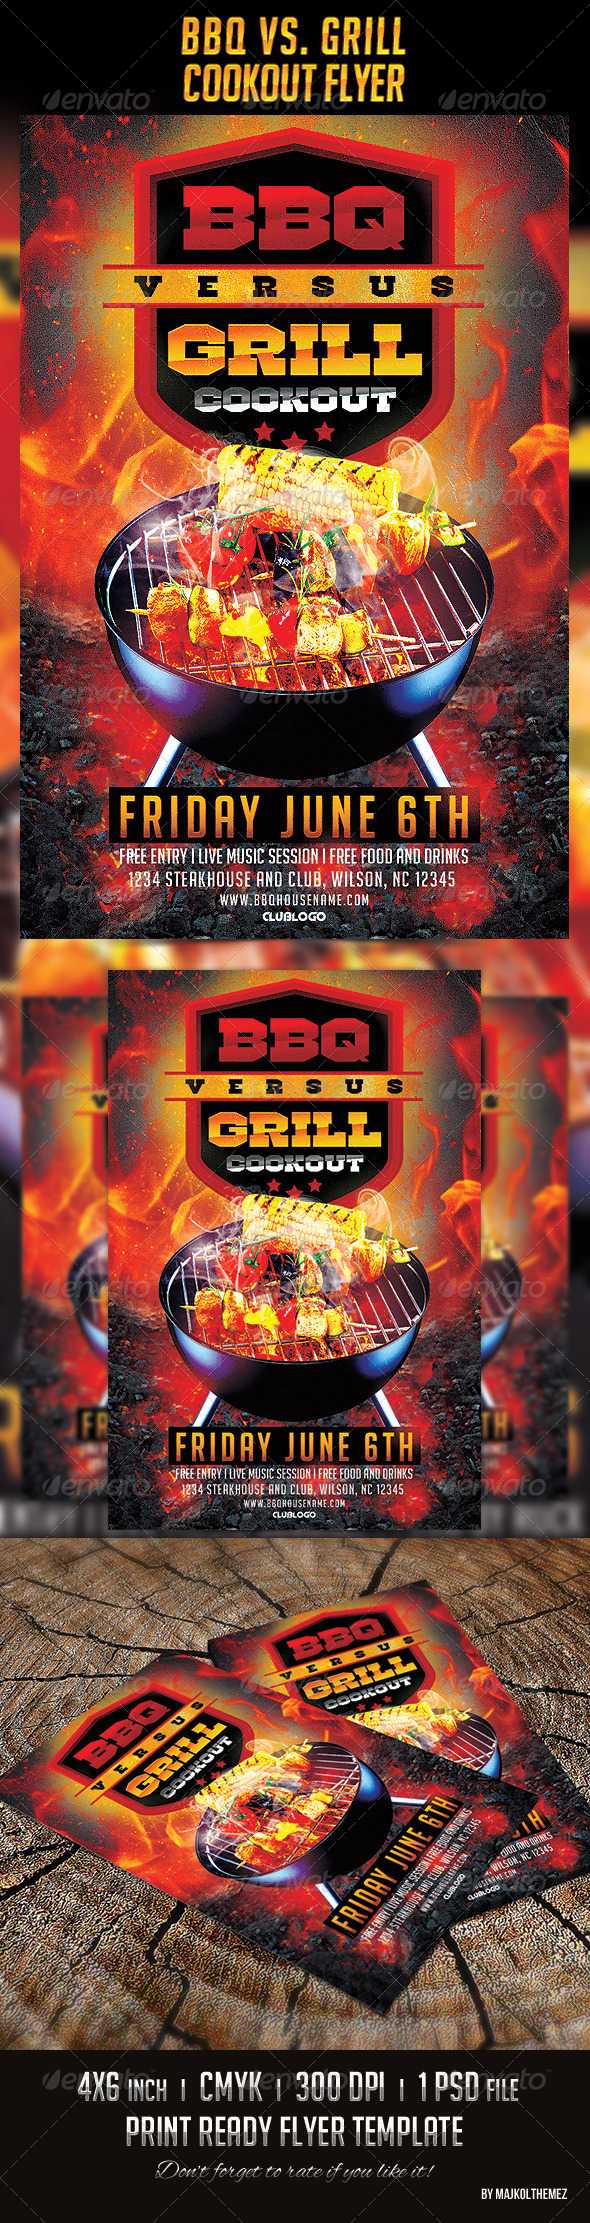 Cookout Flyer Graphics, Designs & Templates From Graphicriver Throughout Cookout Flyer Template